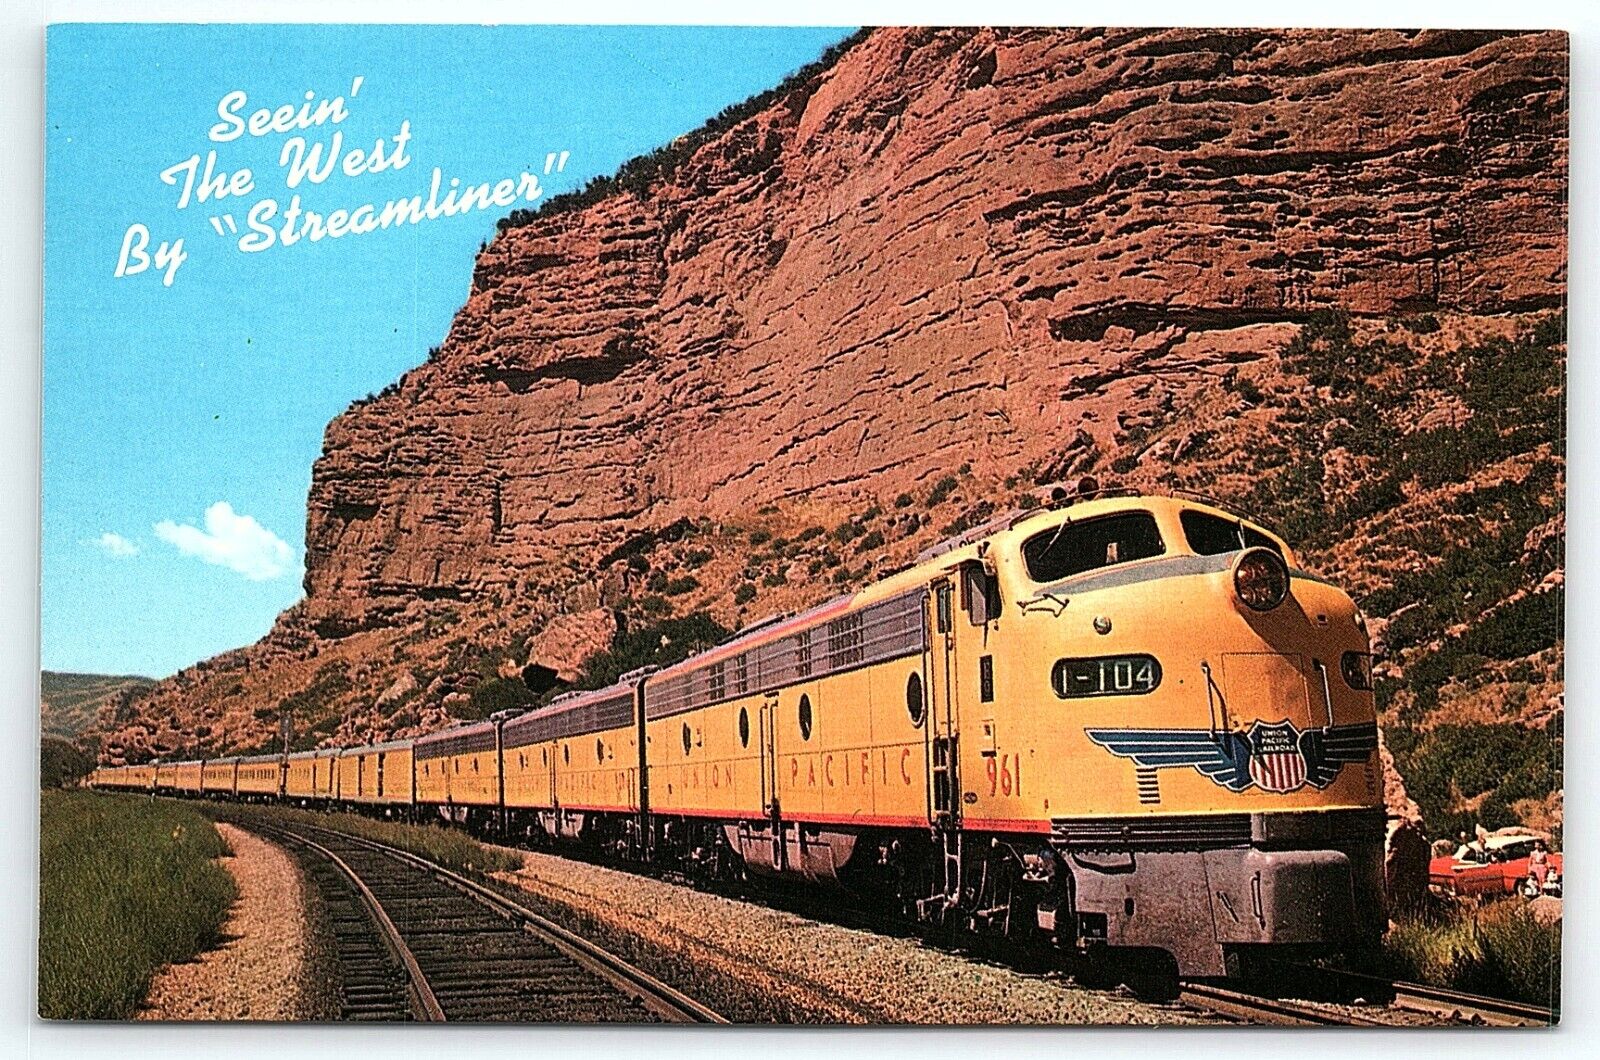 1950s UNION PACIFIC RAILROAD SEEIN' THE WEST BY STREAMLINER POSTCARD P3095